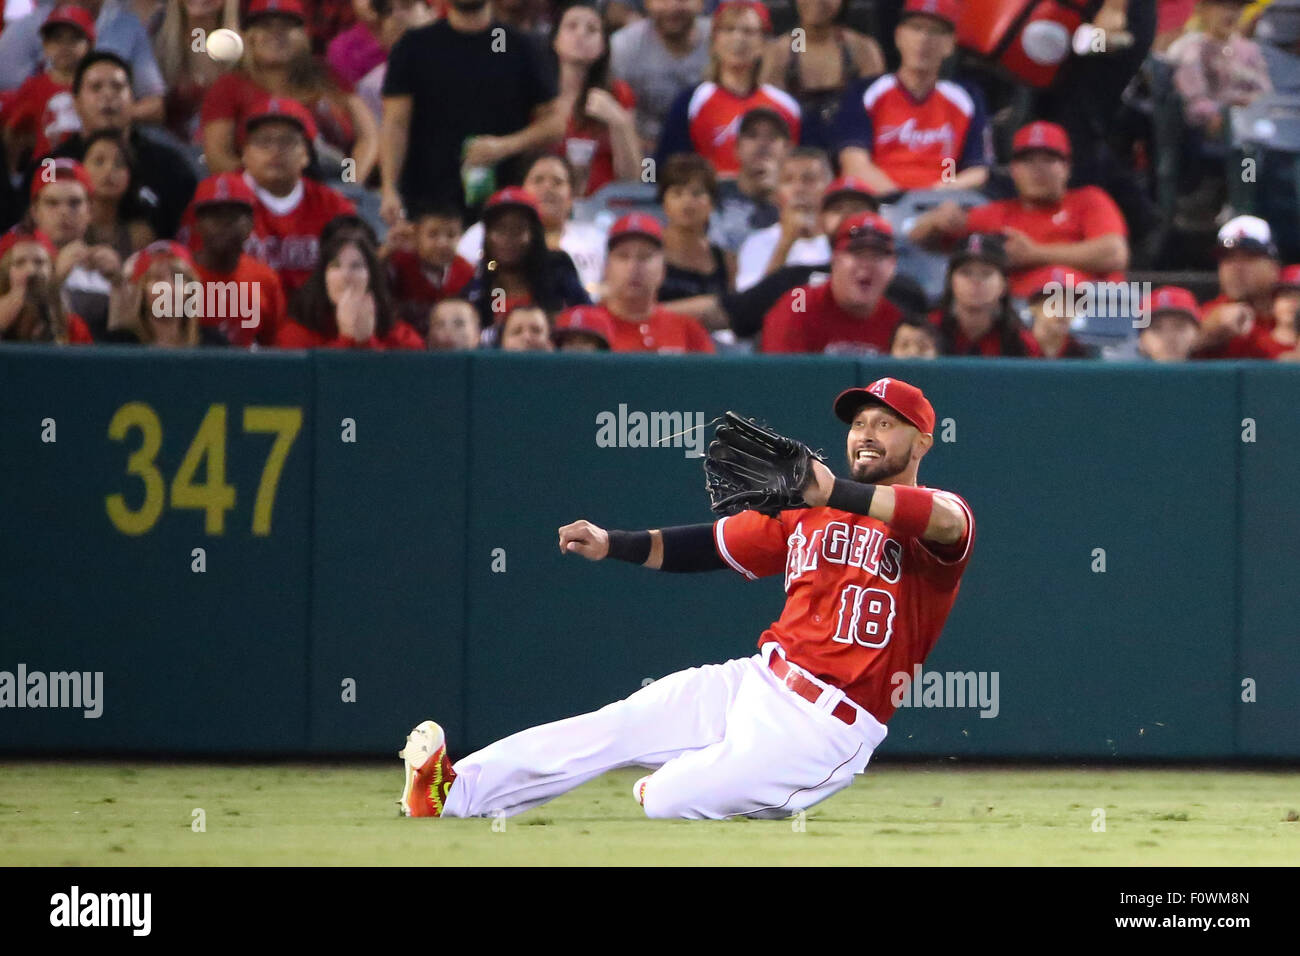 Anaheim, California, USA. 21st August, 2015. Los Angeles Angels right fielder Shane Victorino #18 slides to try to make a catch in left in the game between the Toronto Blue Jays and the Los Angeles Angels of Anaheim, Angel Stadium, Anaheim, CA, Photographer: Peter Joneleit/Cal Sport Media Credit:  Cal Sport Media/Alamy Live News Stock Photo